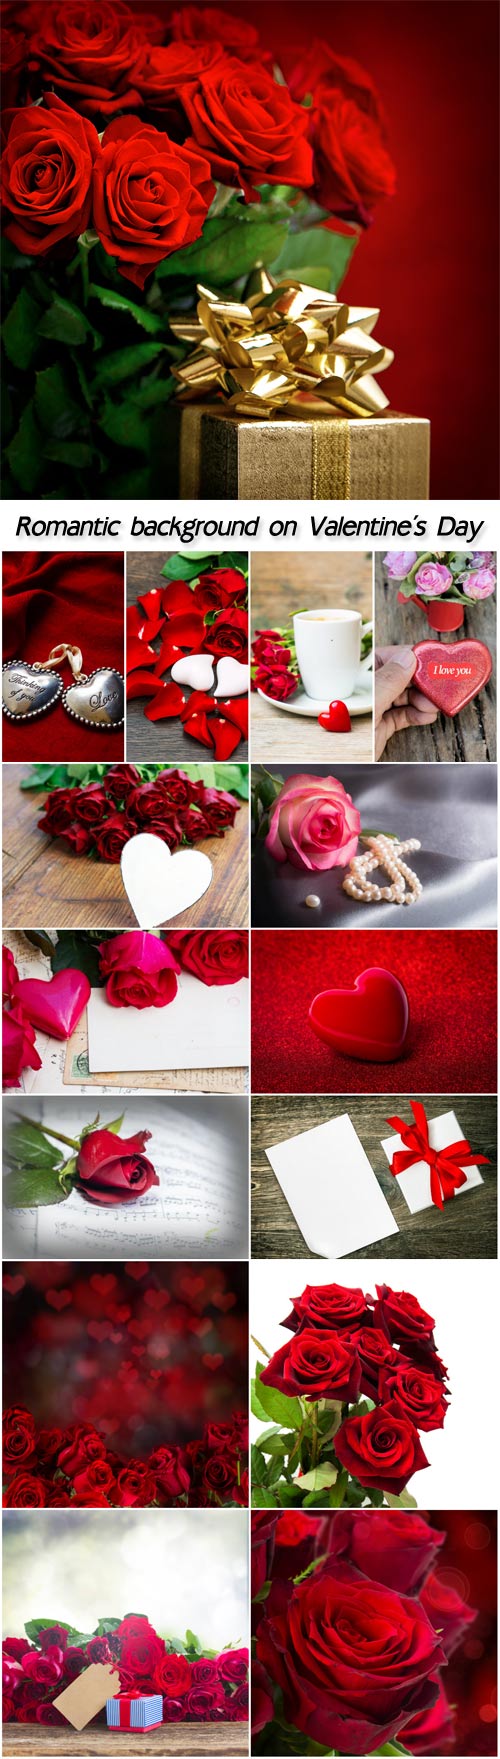 Romantic background on Valentine's Day, hearts and roses